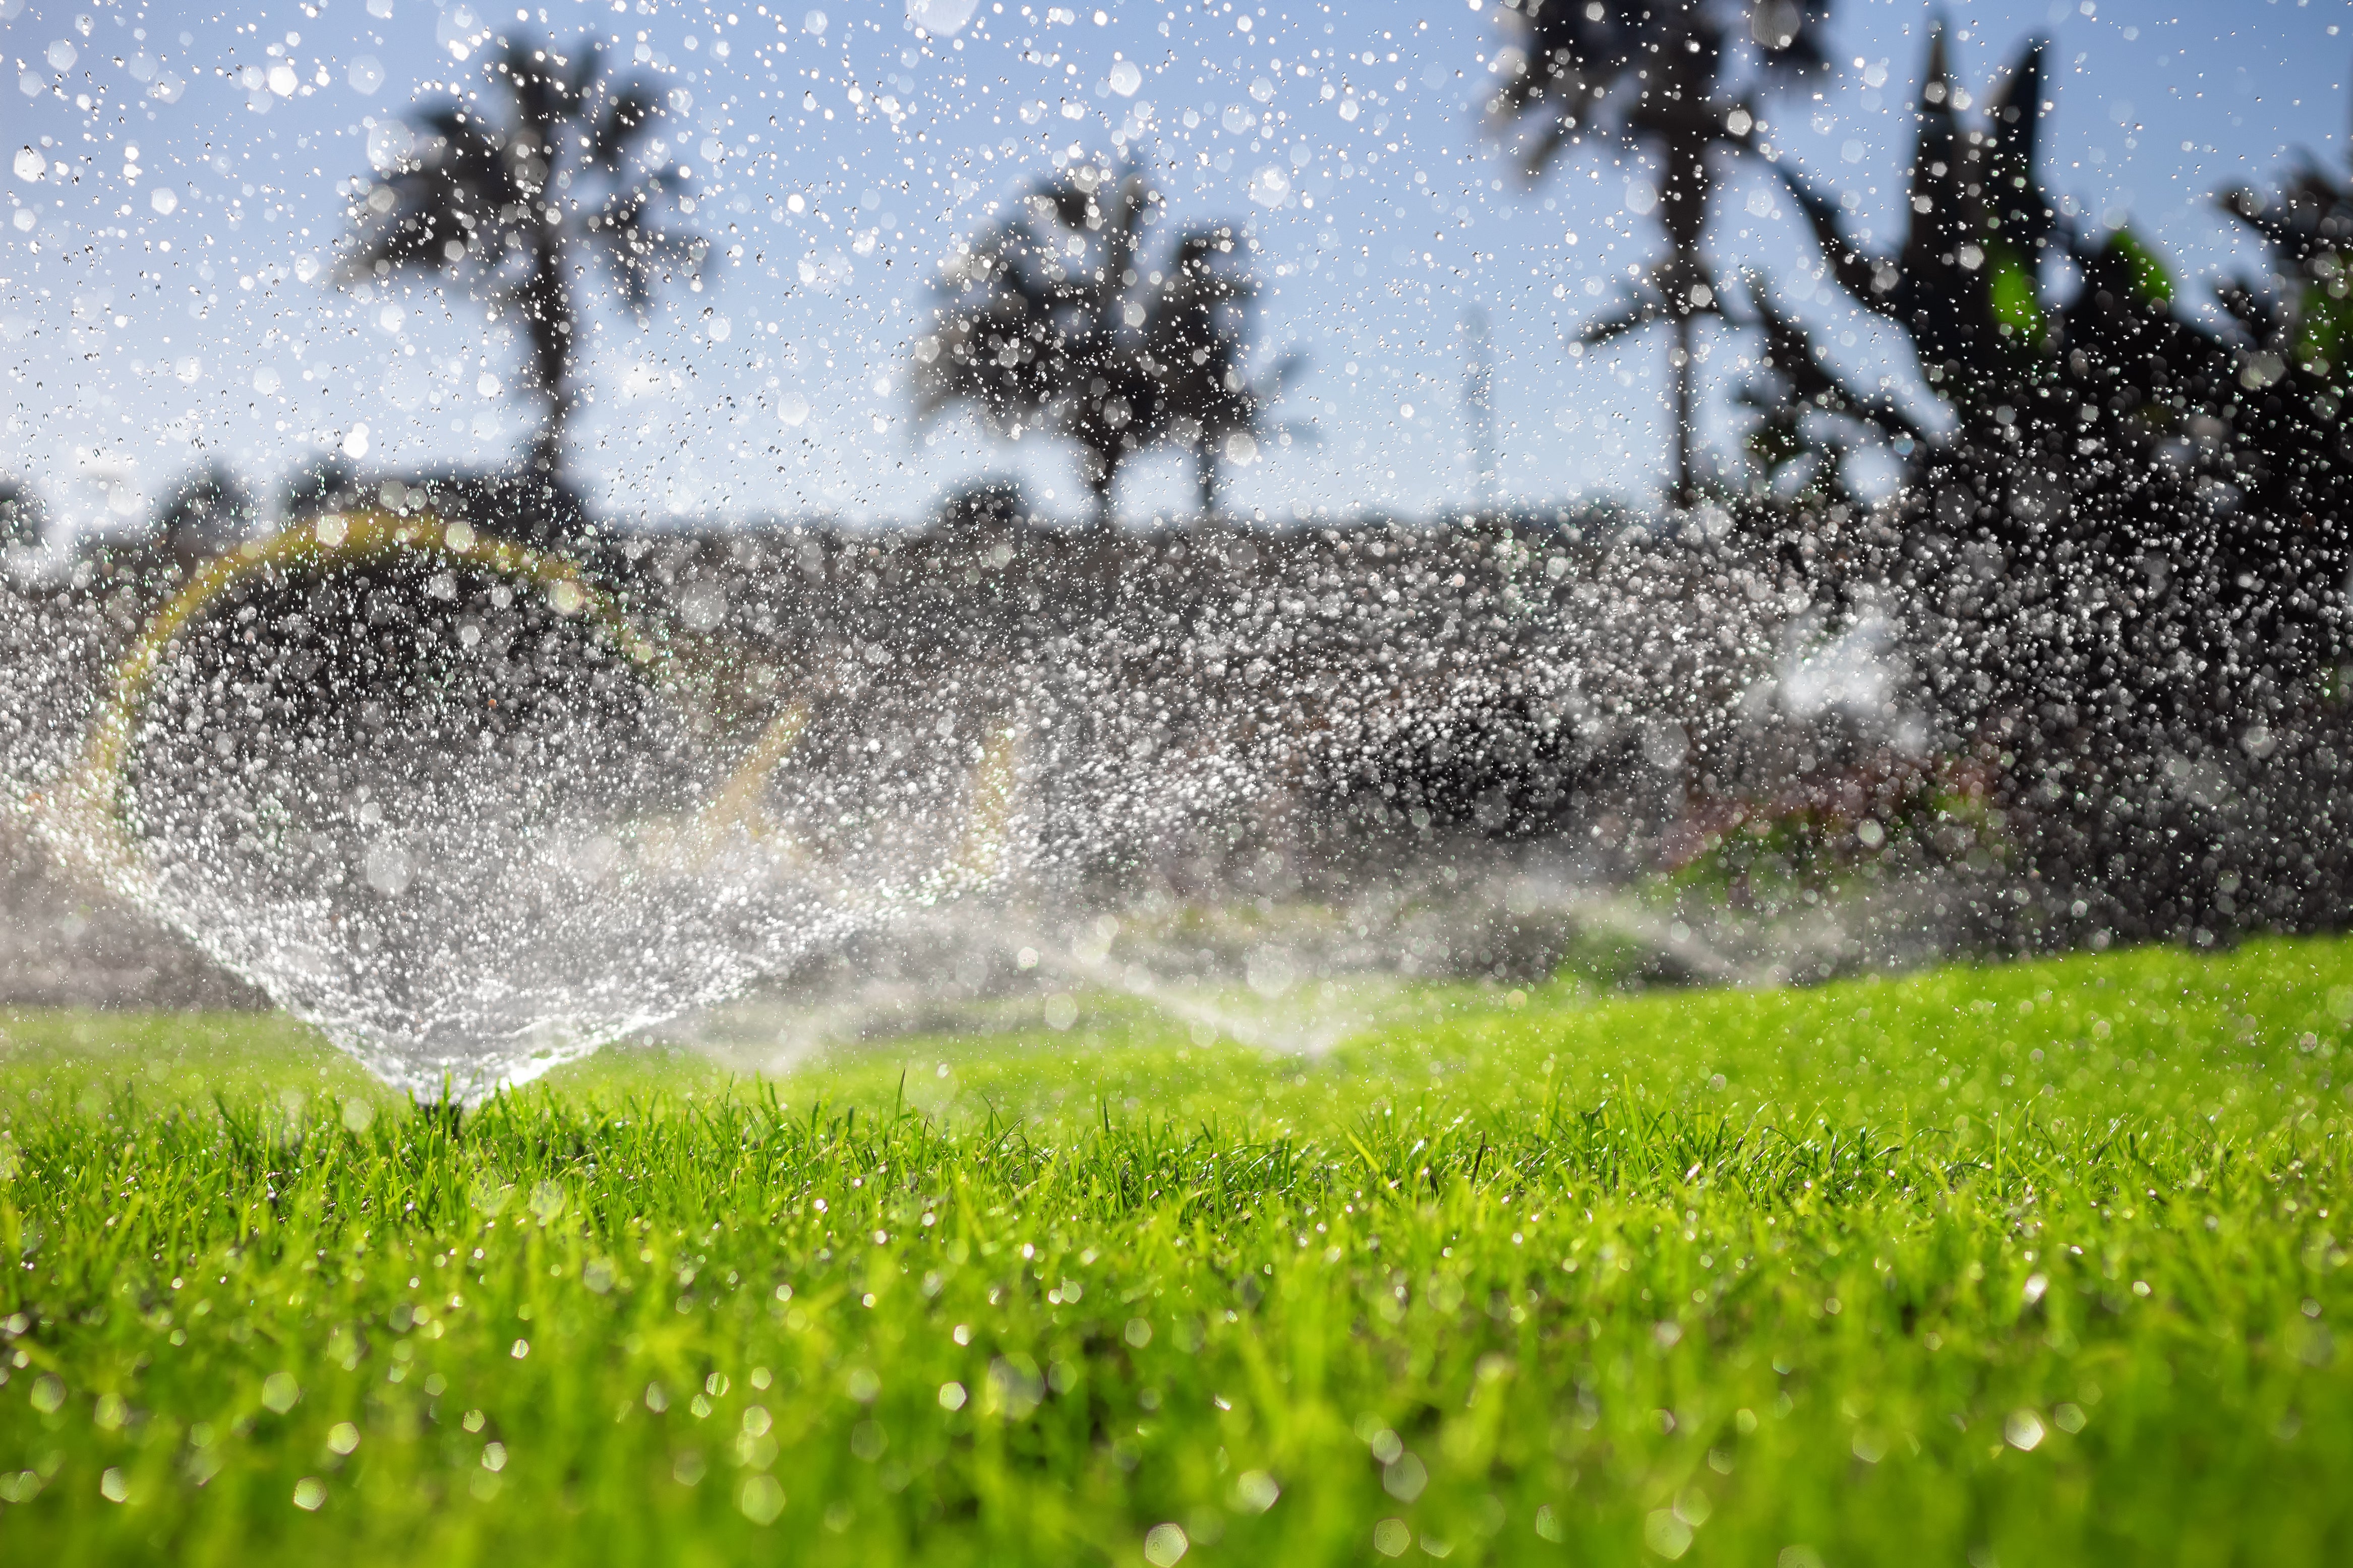 Hot Tips to Keep Your Lawn & Garden Healthy in a Heatwave